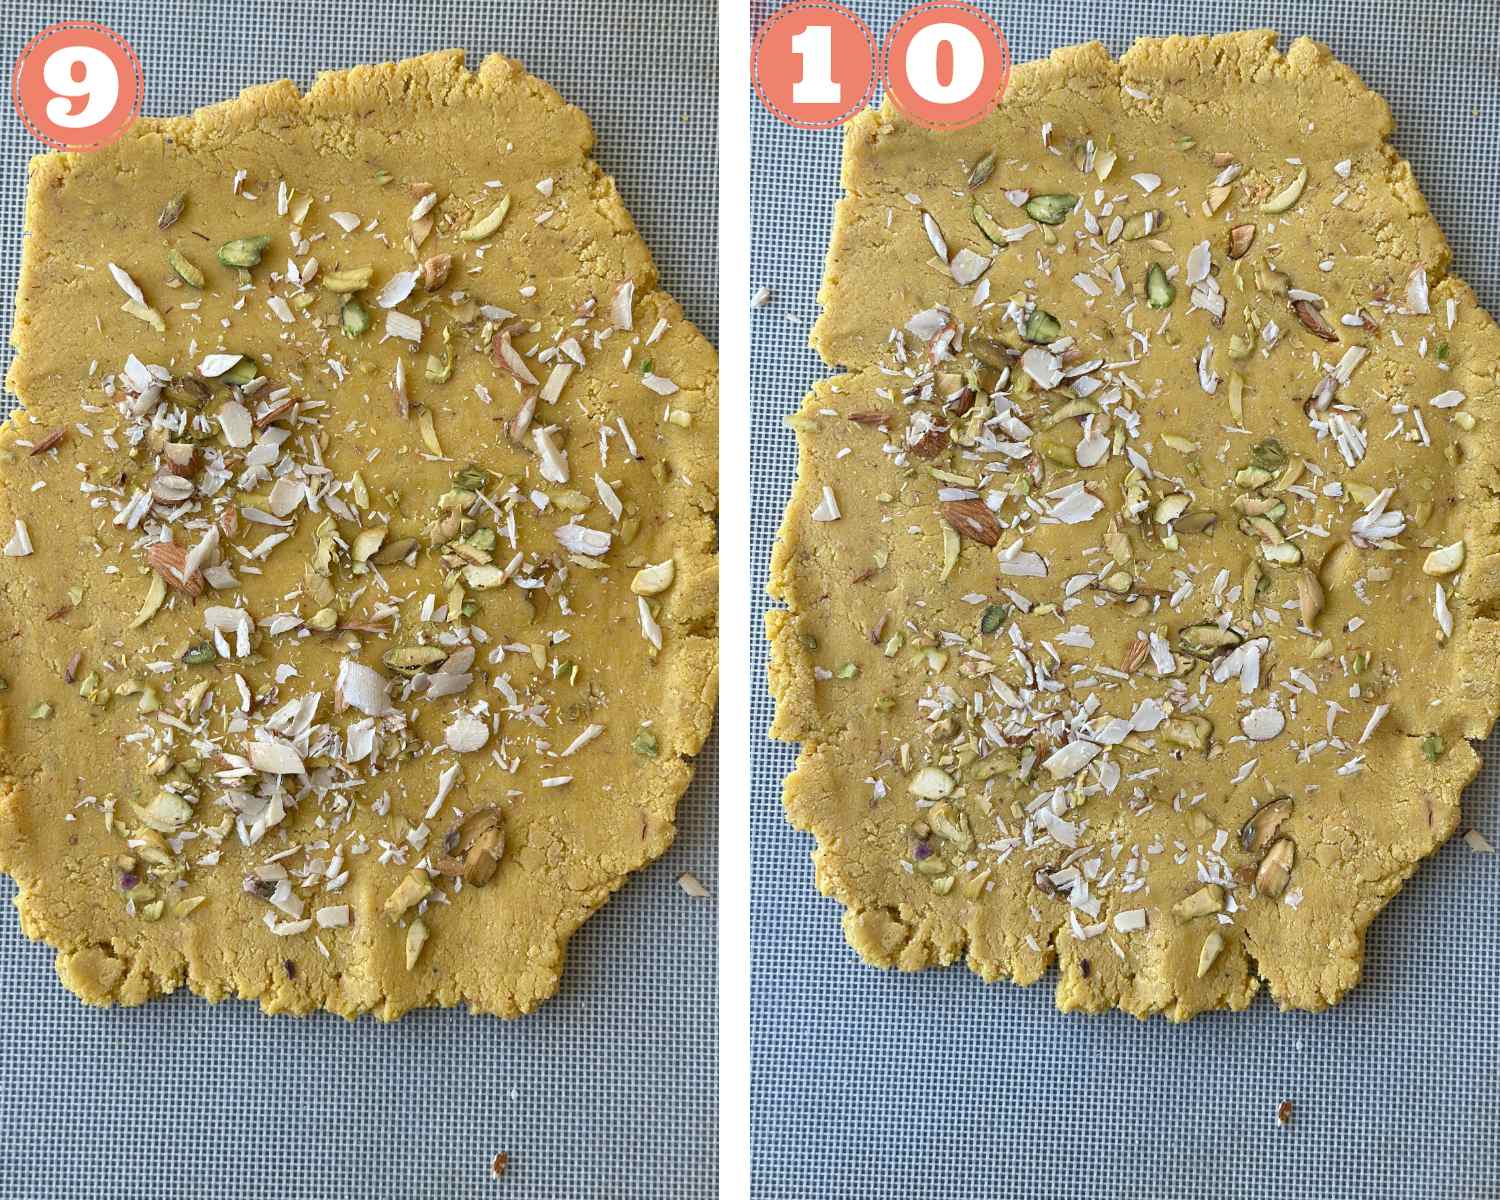 Collage steps to make Badam Puri; adding nuts to the almond flour mix and rolling them into the mix. 